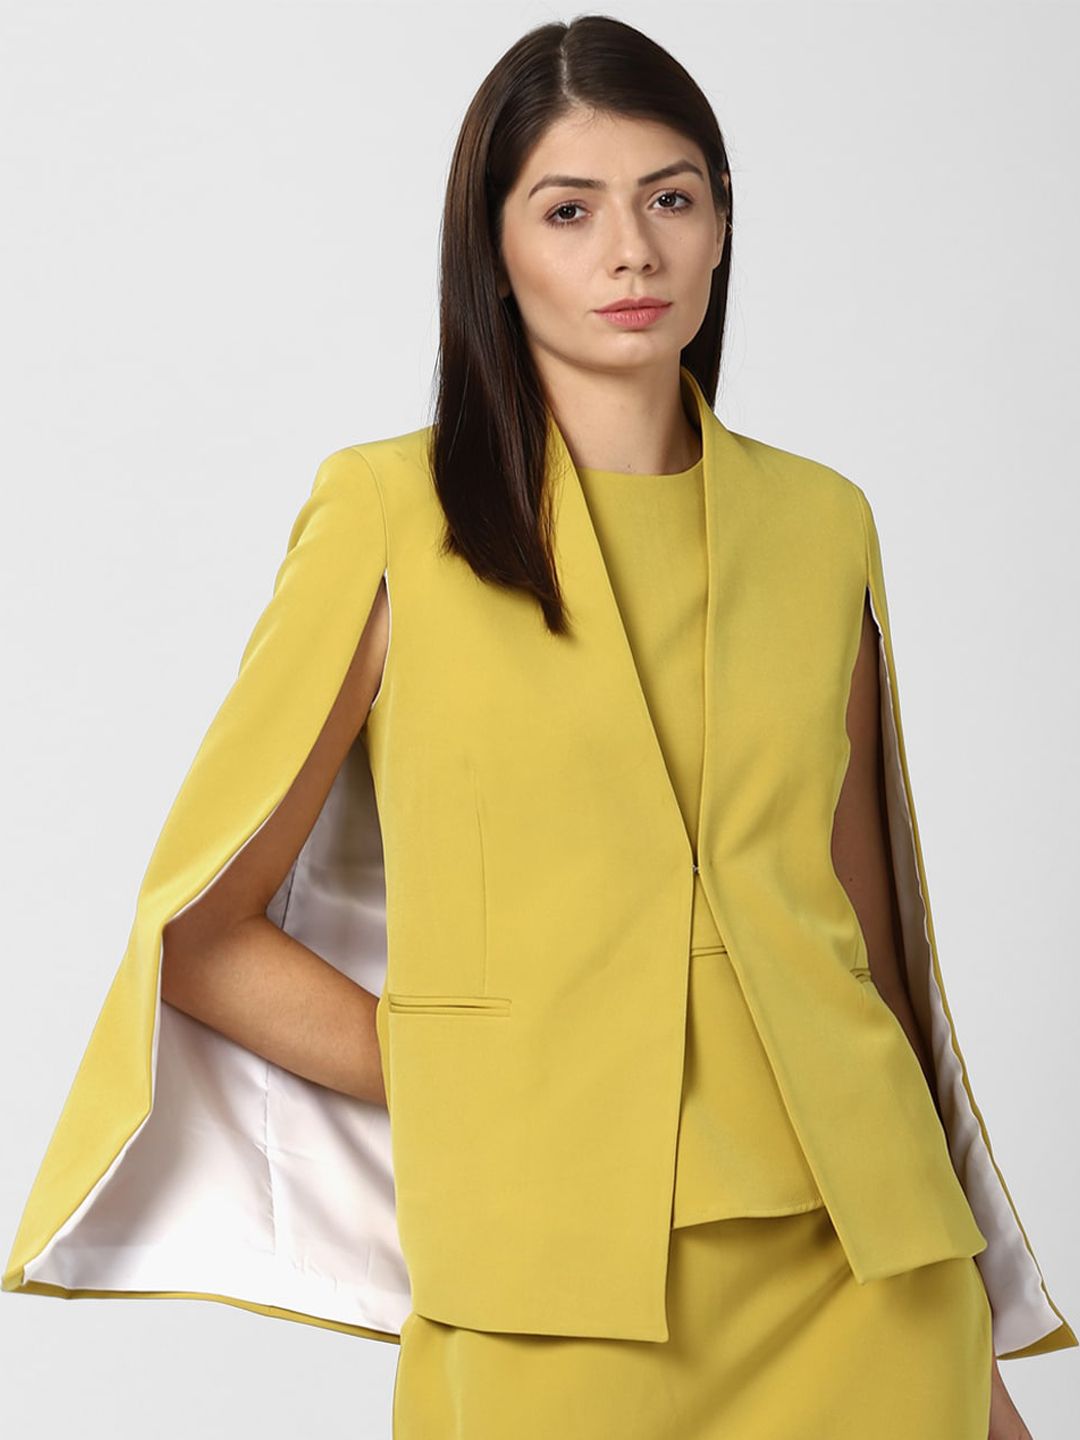 Van Heusen Woman Yellow Solid Single-Breasted Casual Blazer Price in India